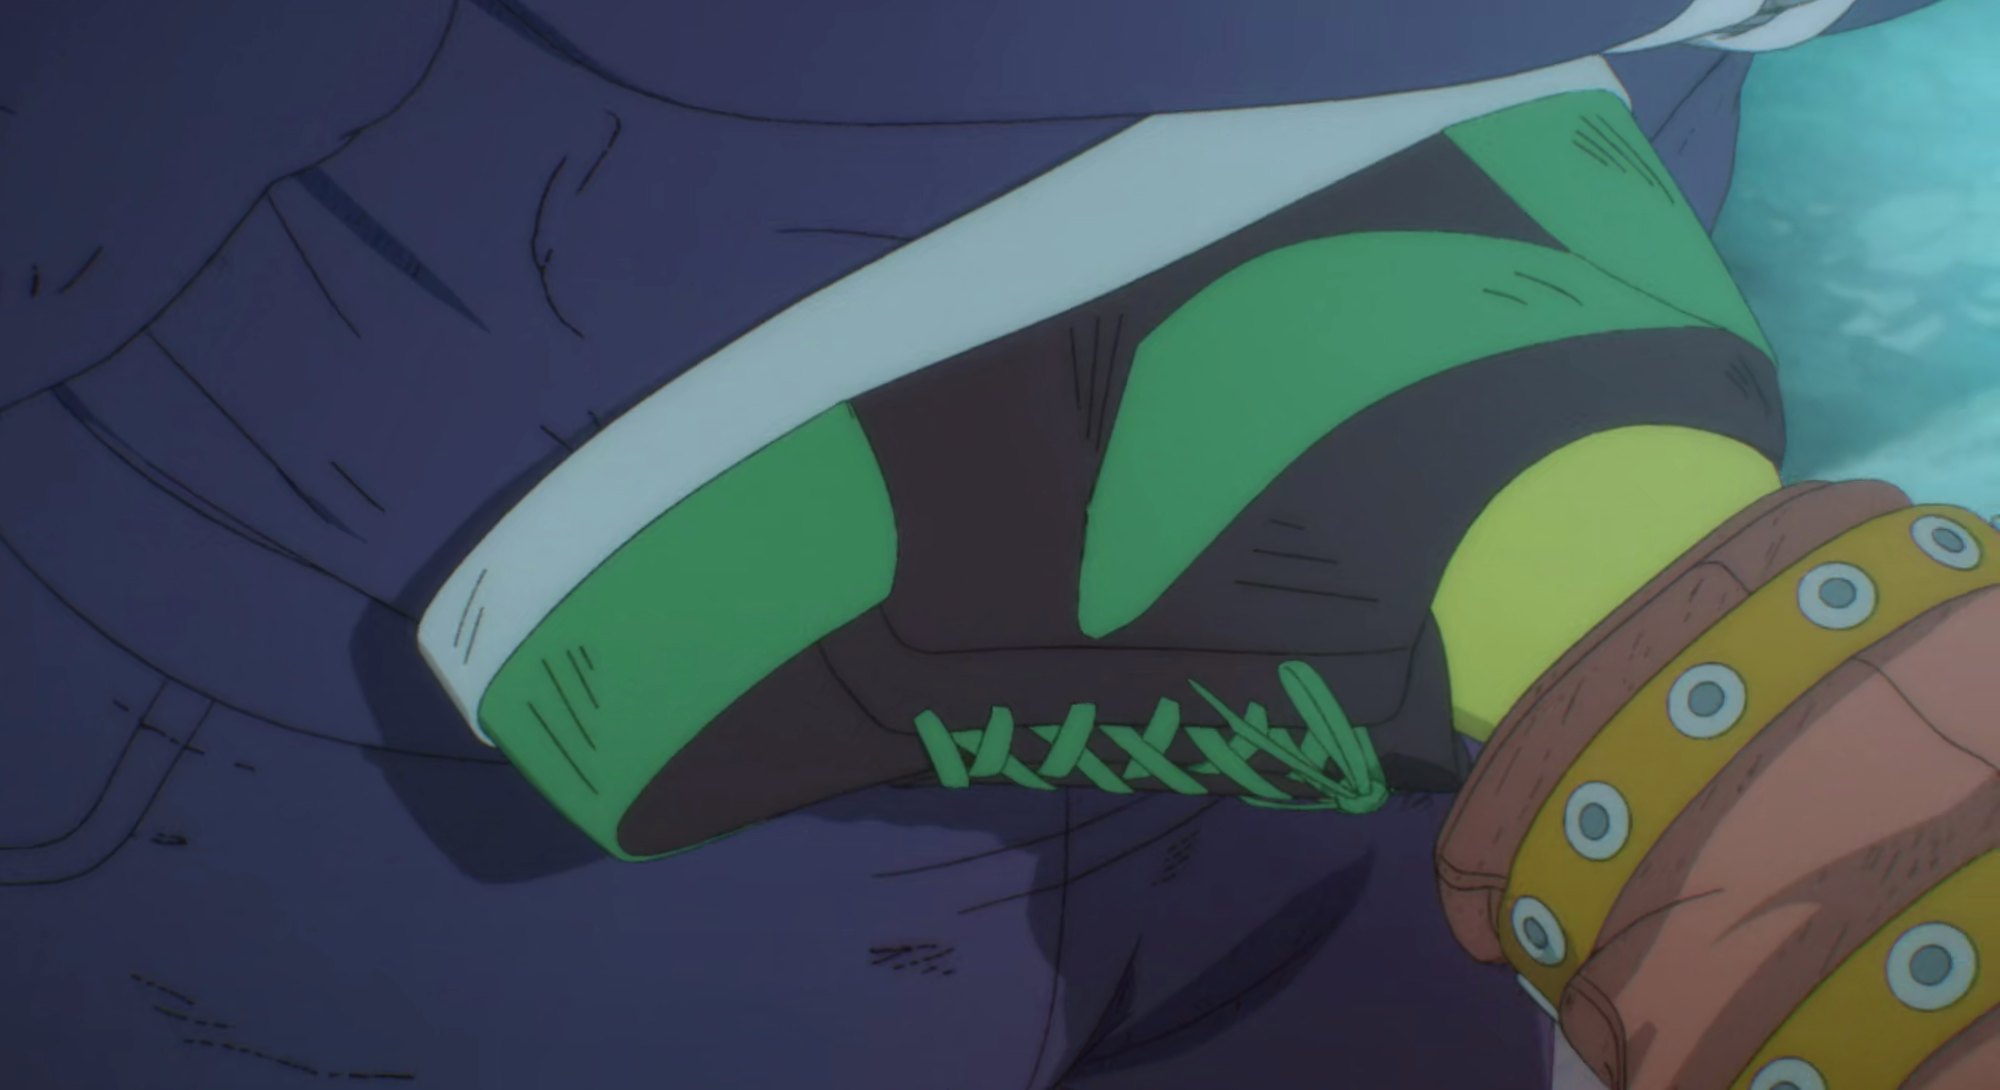 Nike-inspired sneakers in the Netflix anime series 'Dorohedoro'.